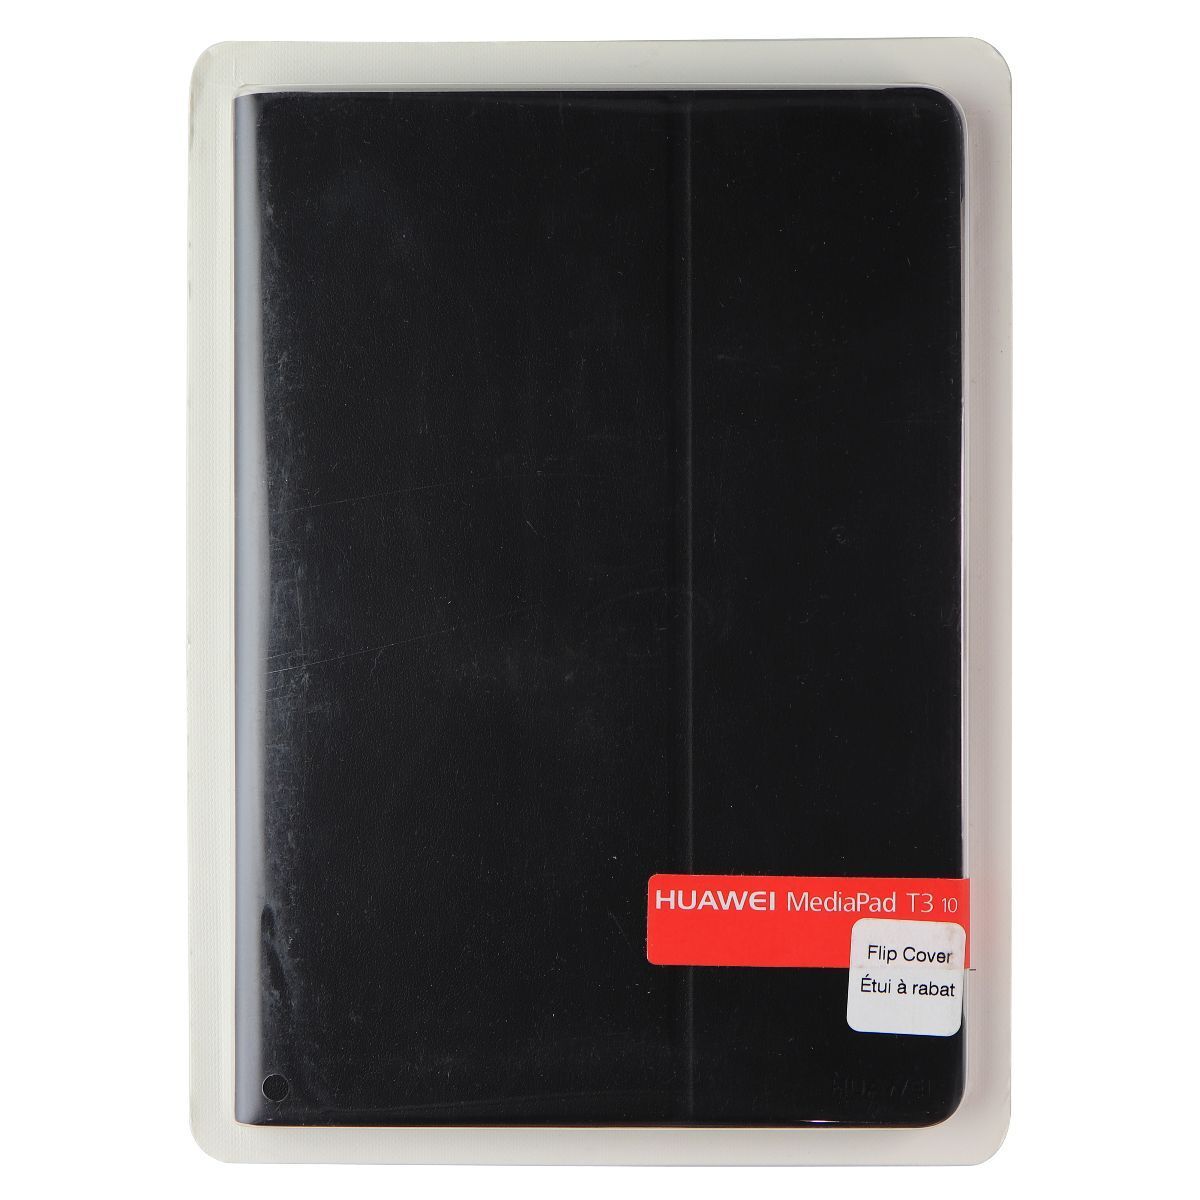 Huawei Official Protective Flip Cover for Huawei MediaPad T3 10 - Black